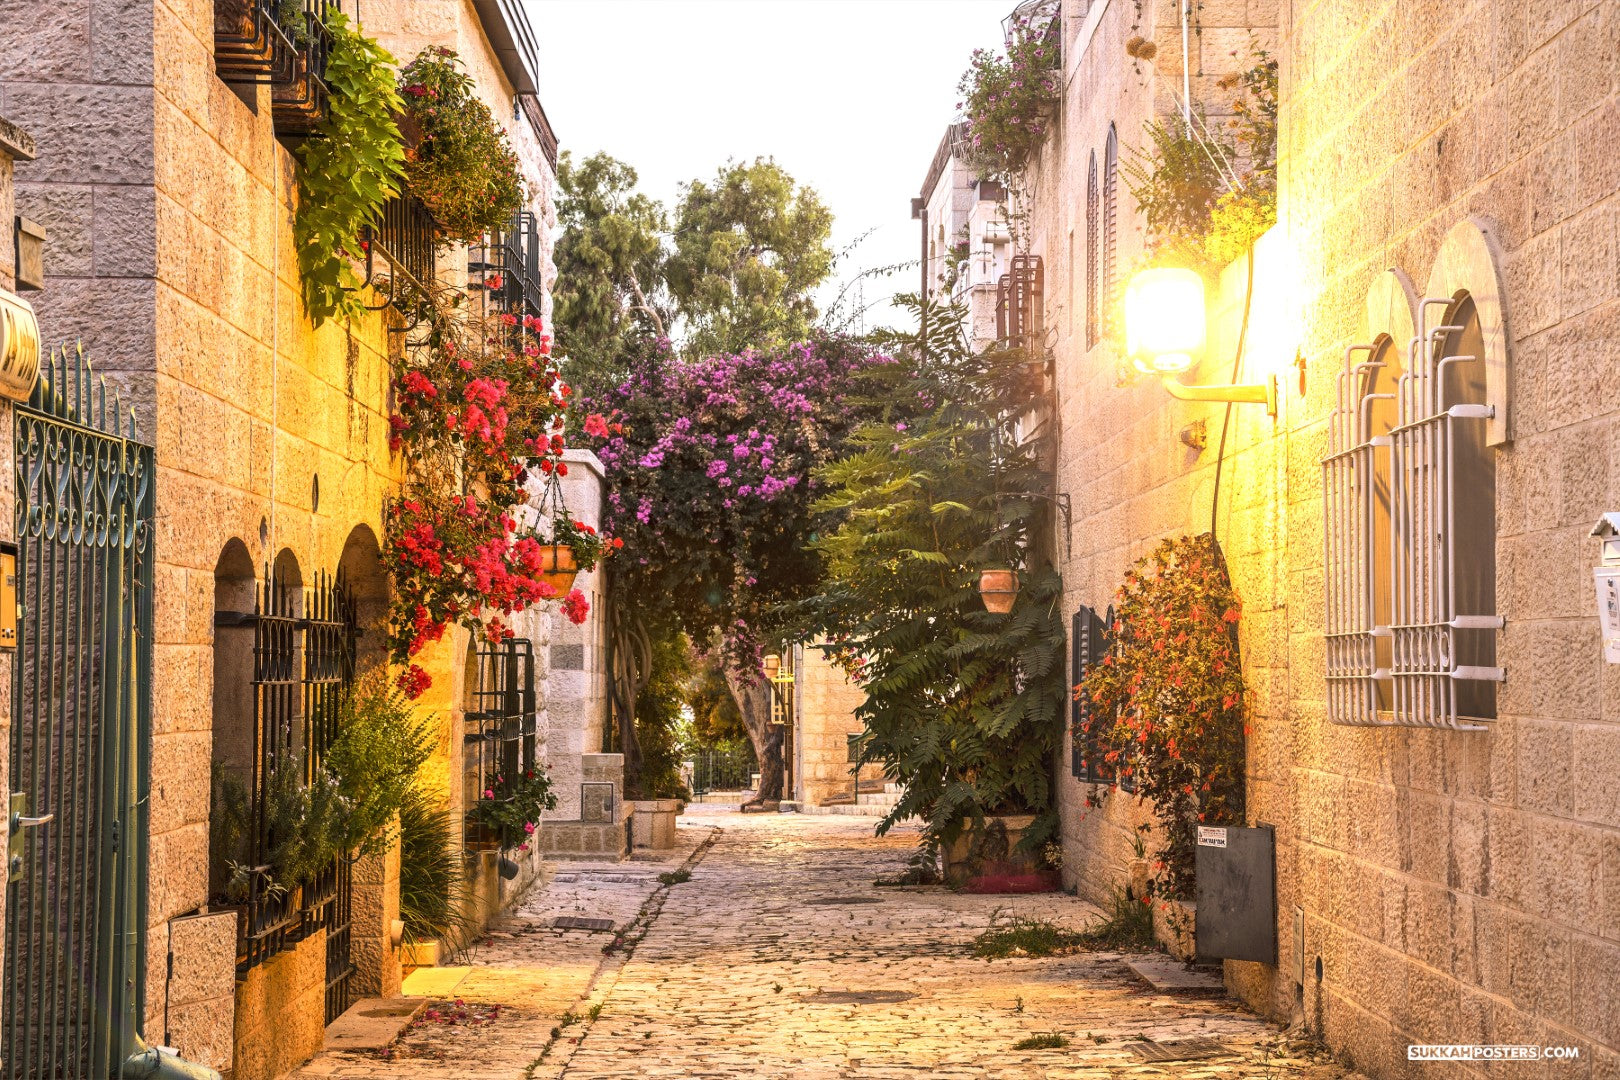 Enjoy the beauty of Jerusalem with this awesome scene in an alley in the Yemin Moshe neighborhood with thisSukkah Mural